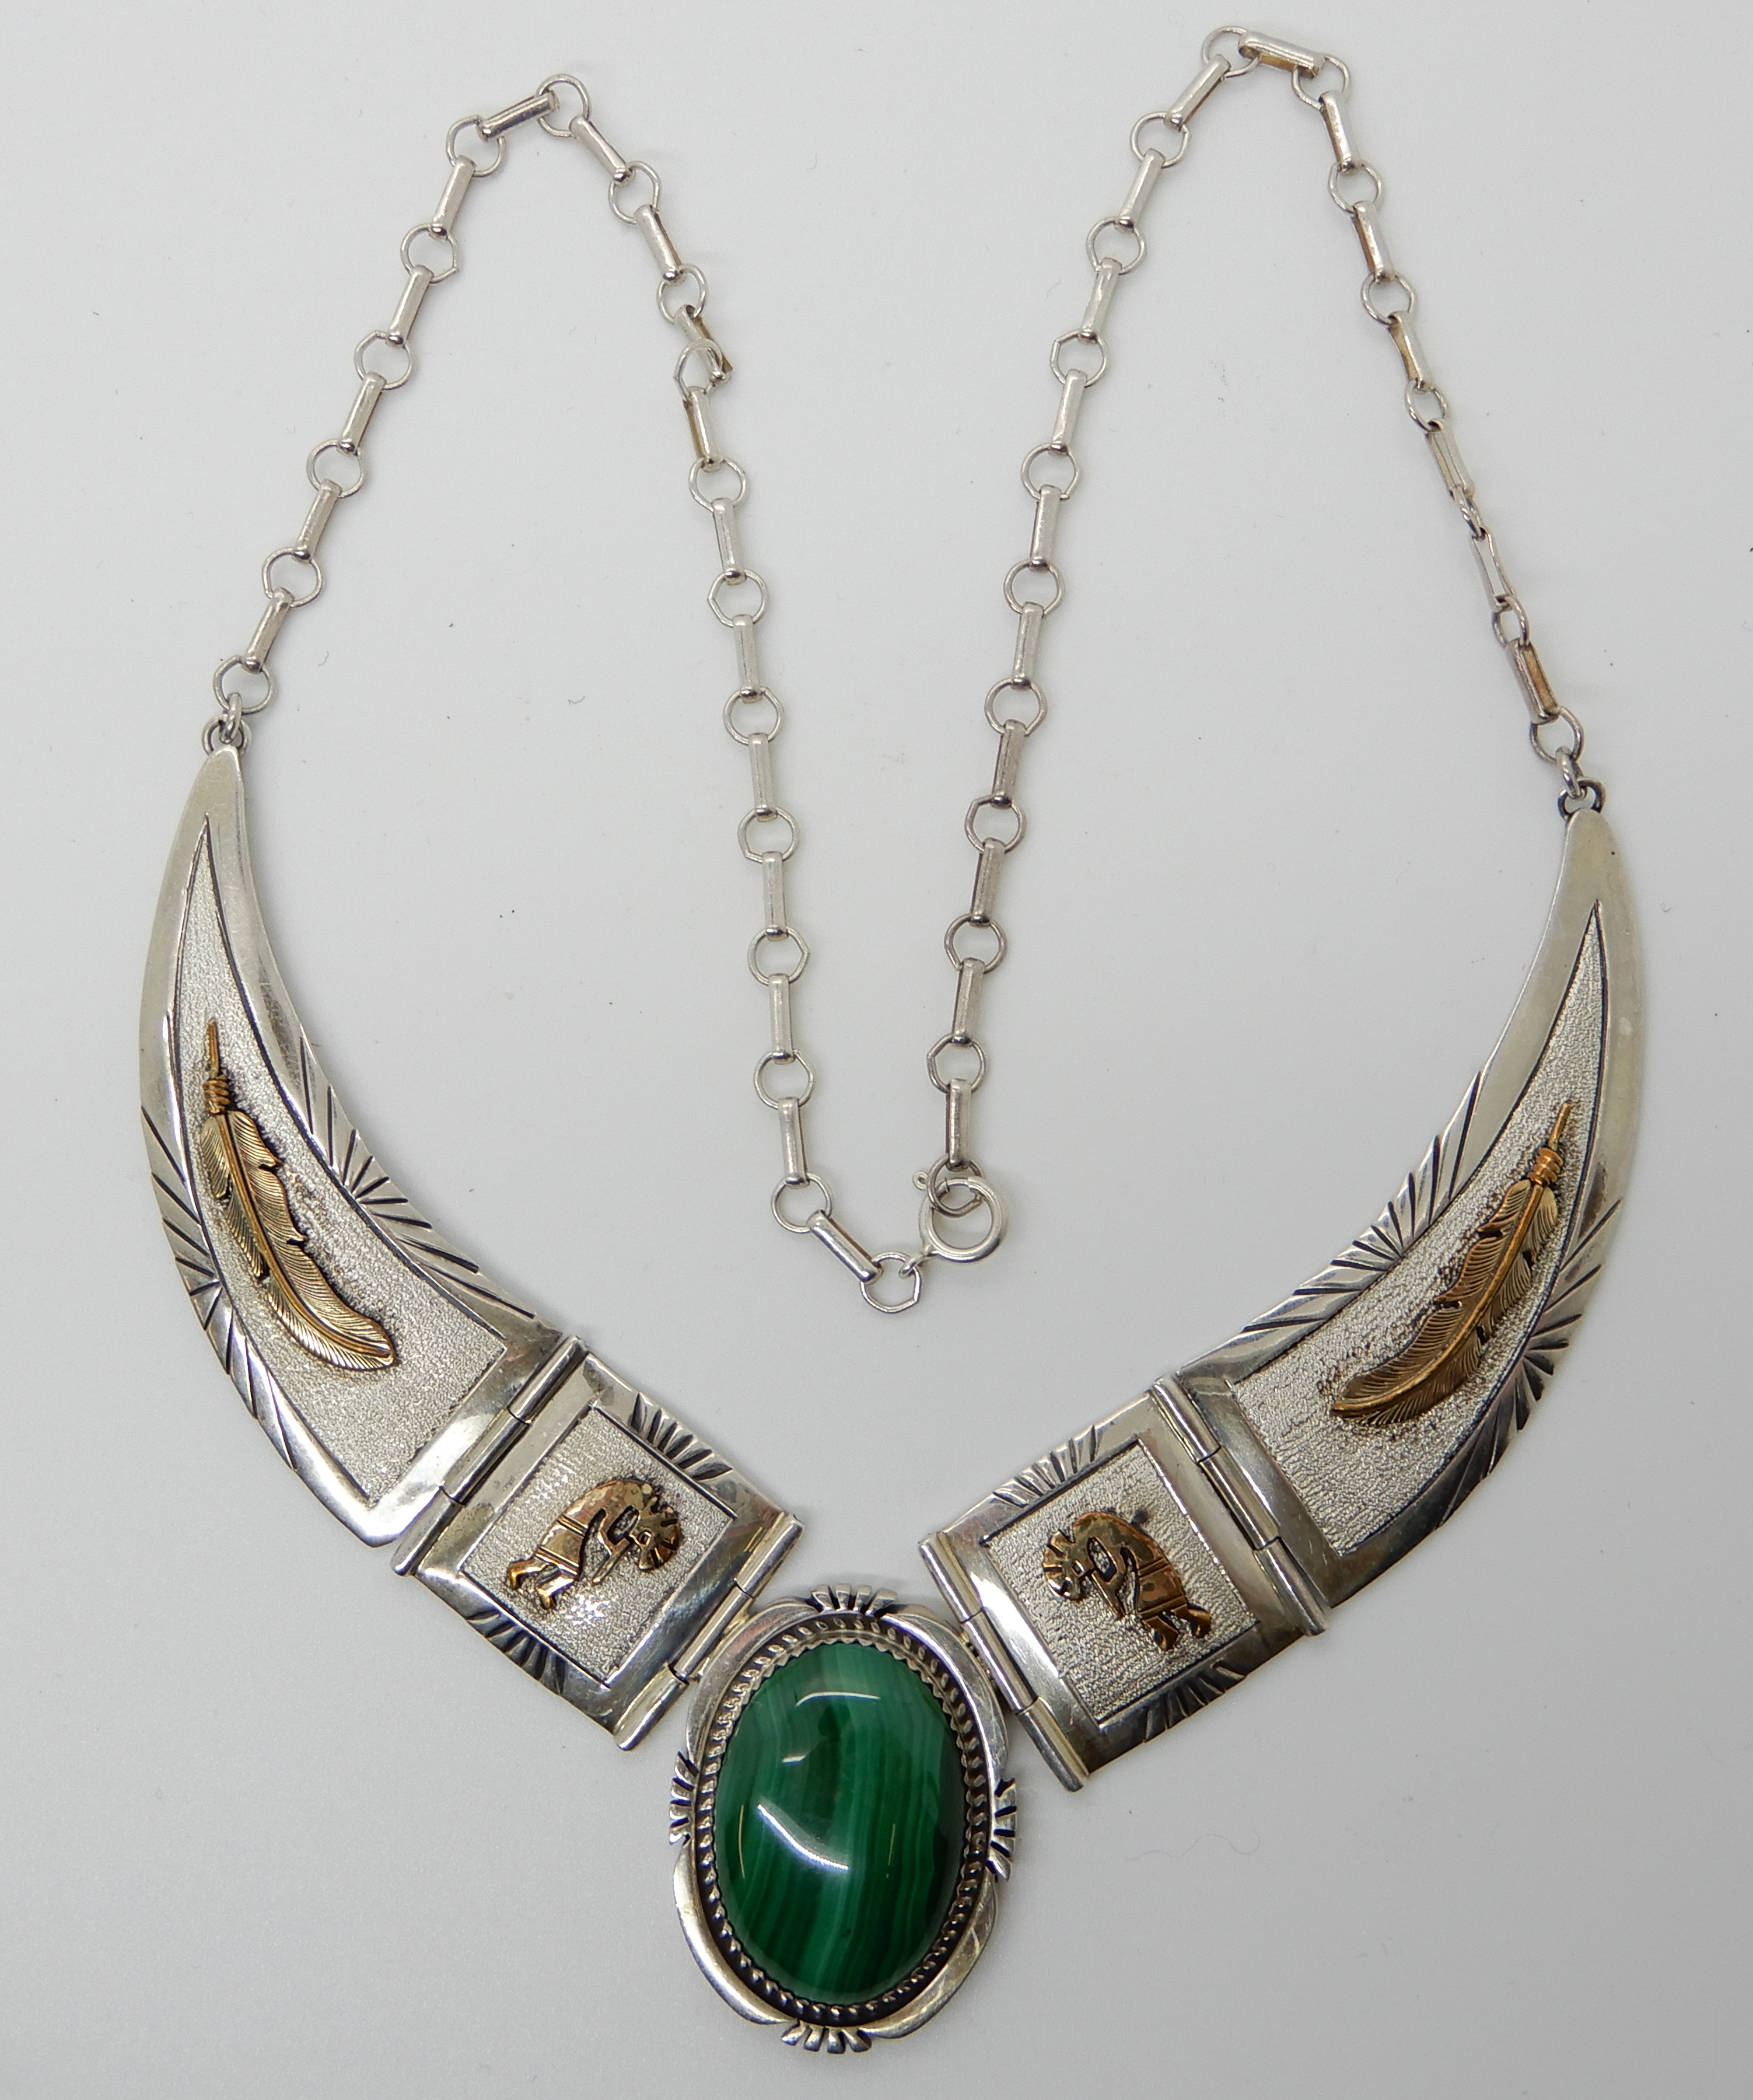 A silver Navaho design necklace with gold plated detail further set with malachite, by Mark Yazzie